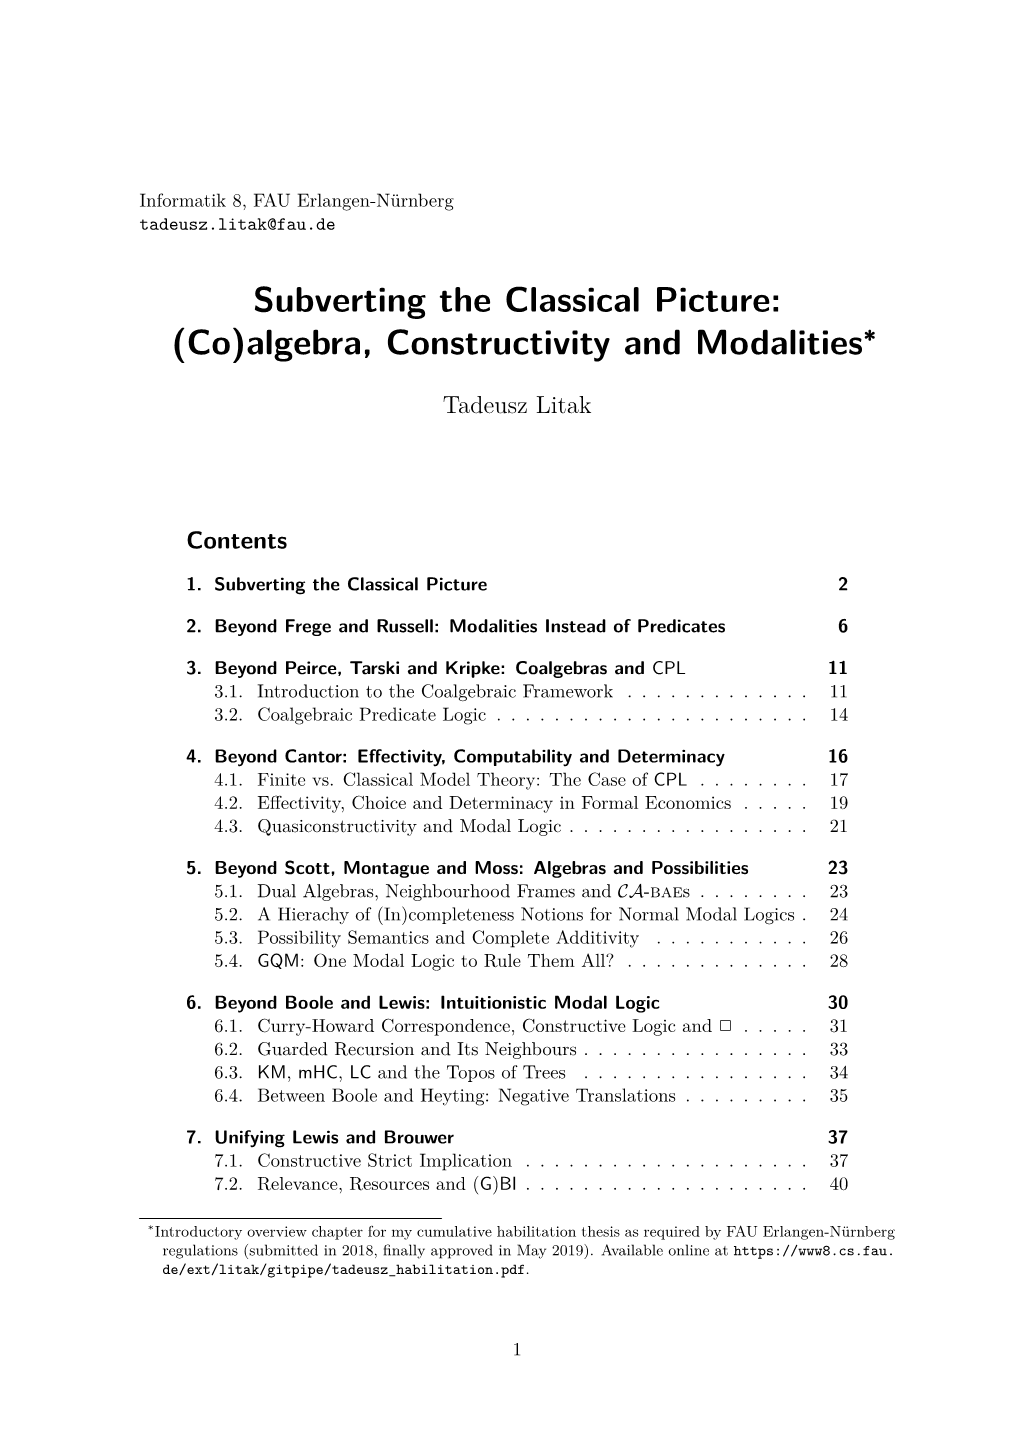 Subverting the Classical Picture: (Co)Algebra, Constructivity and Modalities∗